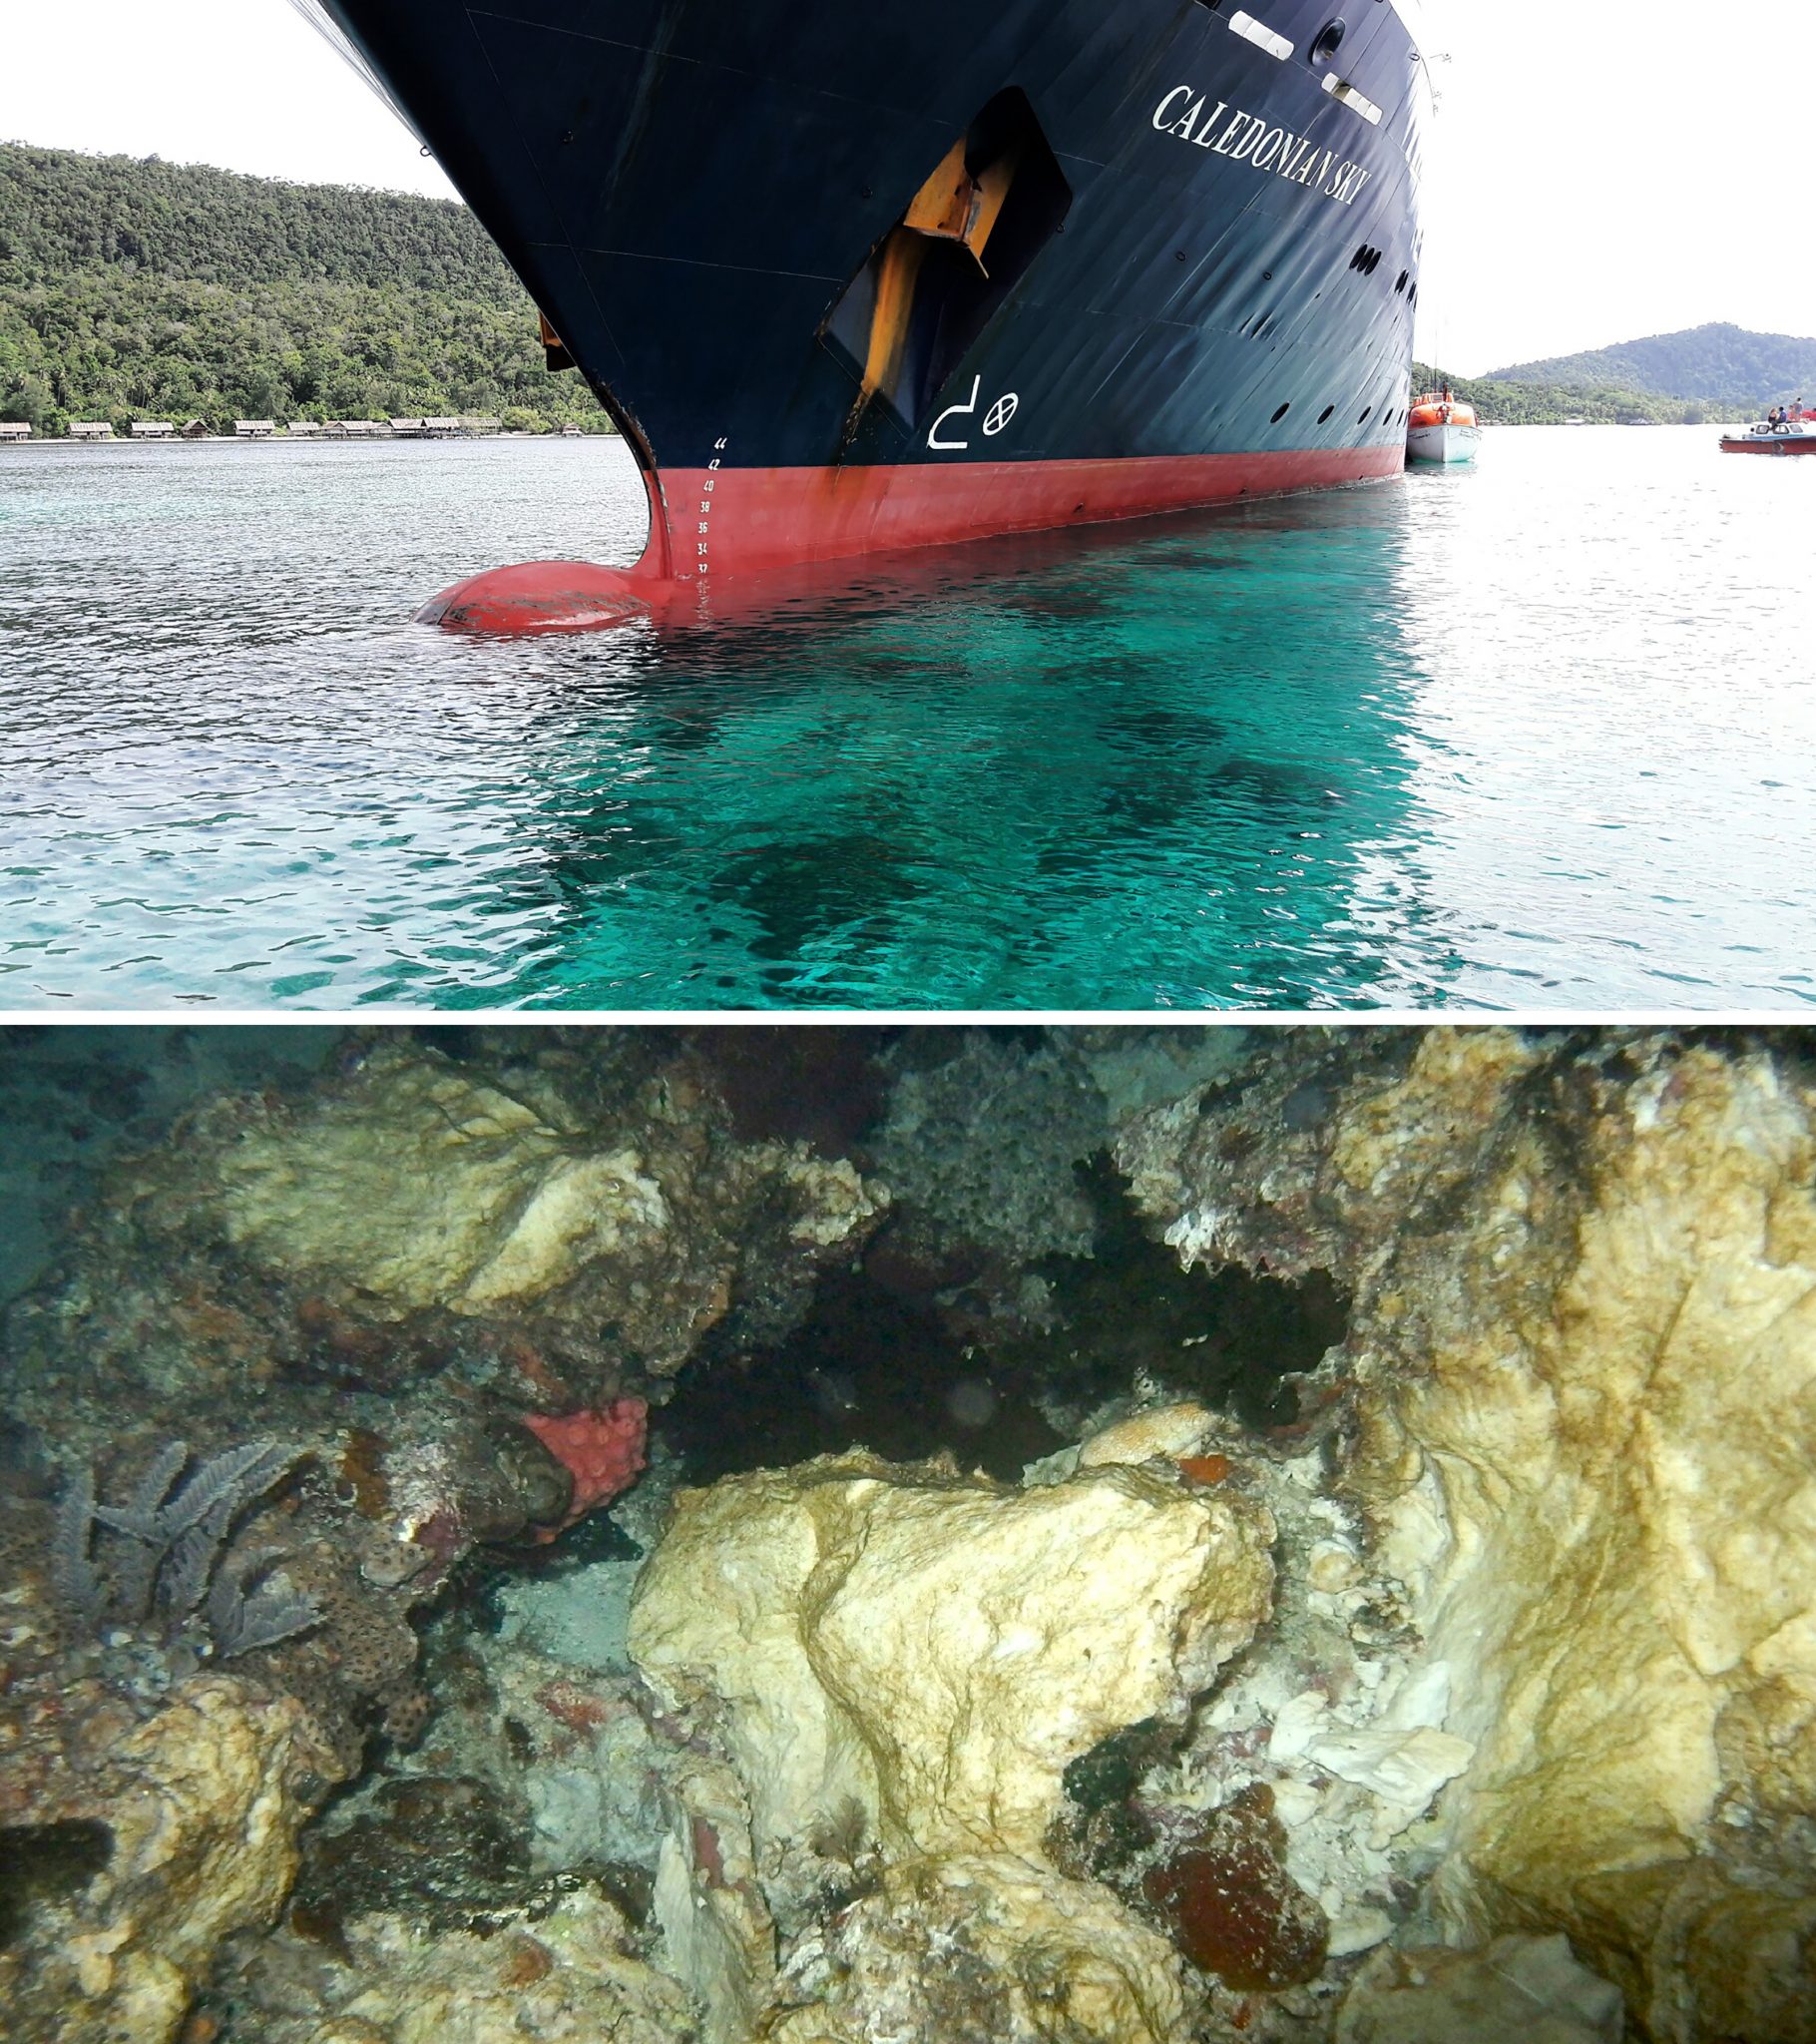 (FILES) This combo of file photos taken on March 4, 2017 shows the Caledonian Sky (top), a British-owned cruise ship, which smashed into pristine coral reefs causing extensive damage in Raja Ampat, a remote corner of Indonesia known as one of the world's most biodiverse marine habitats, and damaged coral reef (bottom) after the ship smashed into it causing extensive damage. Indonesia summoned the British ambassador after a cruise ship on a voyage organised by a London-based company smashed into coral reefs in a popular tourist spot and caused extensive damage. Indonesia summoned the British ambassador on March 17, 2017 after the cruise ship on a voyage organised by a London-based company smashed into coral reefs in a popular tourist spot and caused extensive damage. / AFP PHOTO / RUBEN SAUYAI